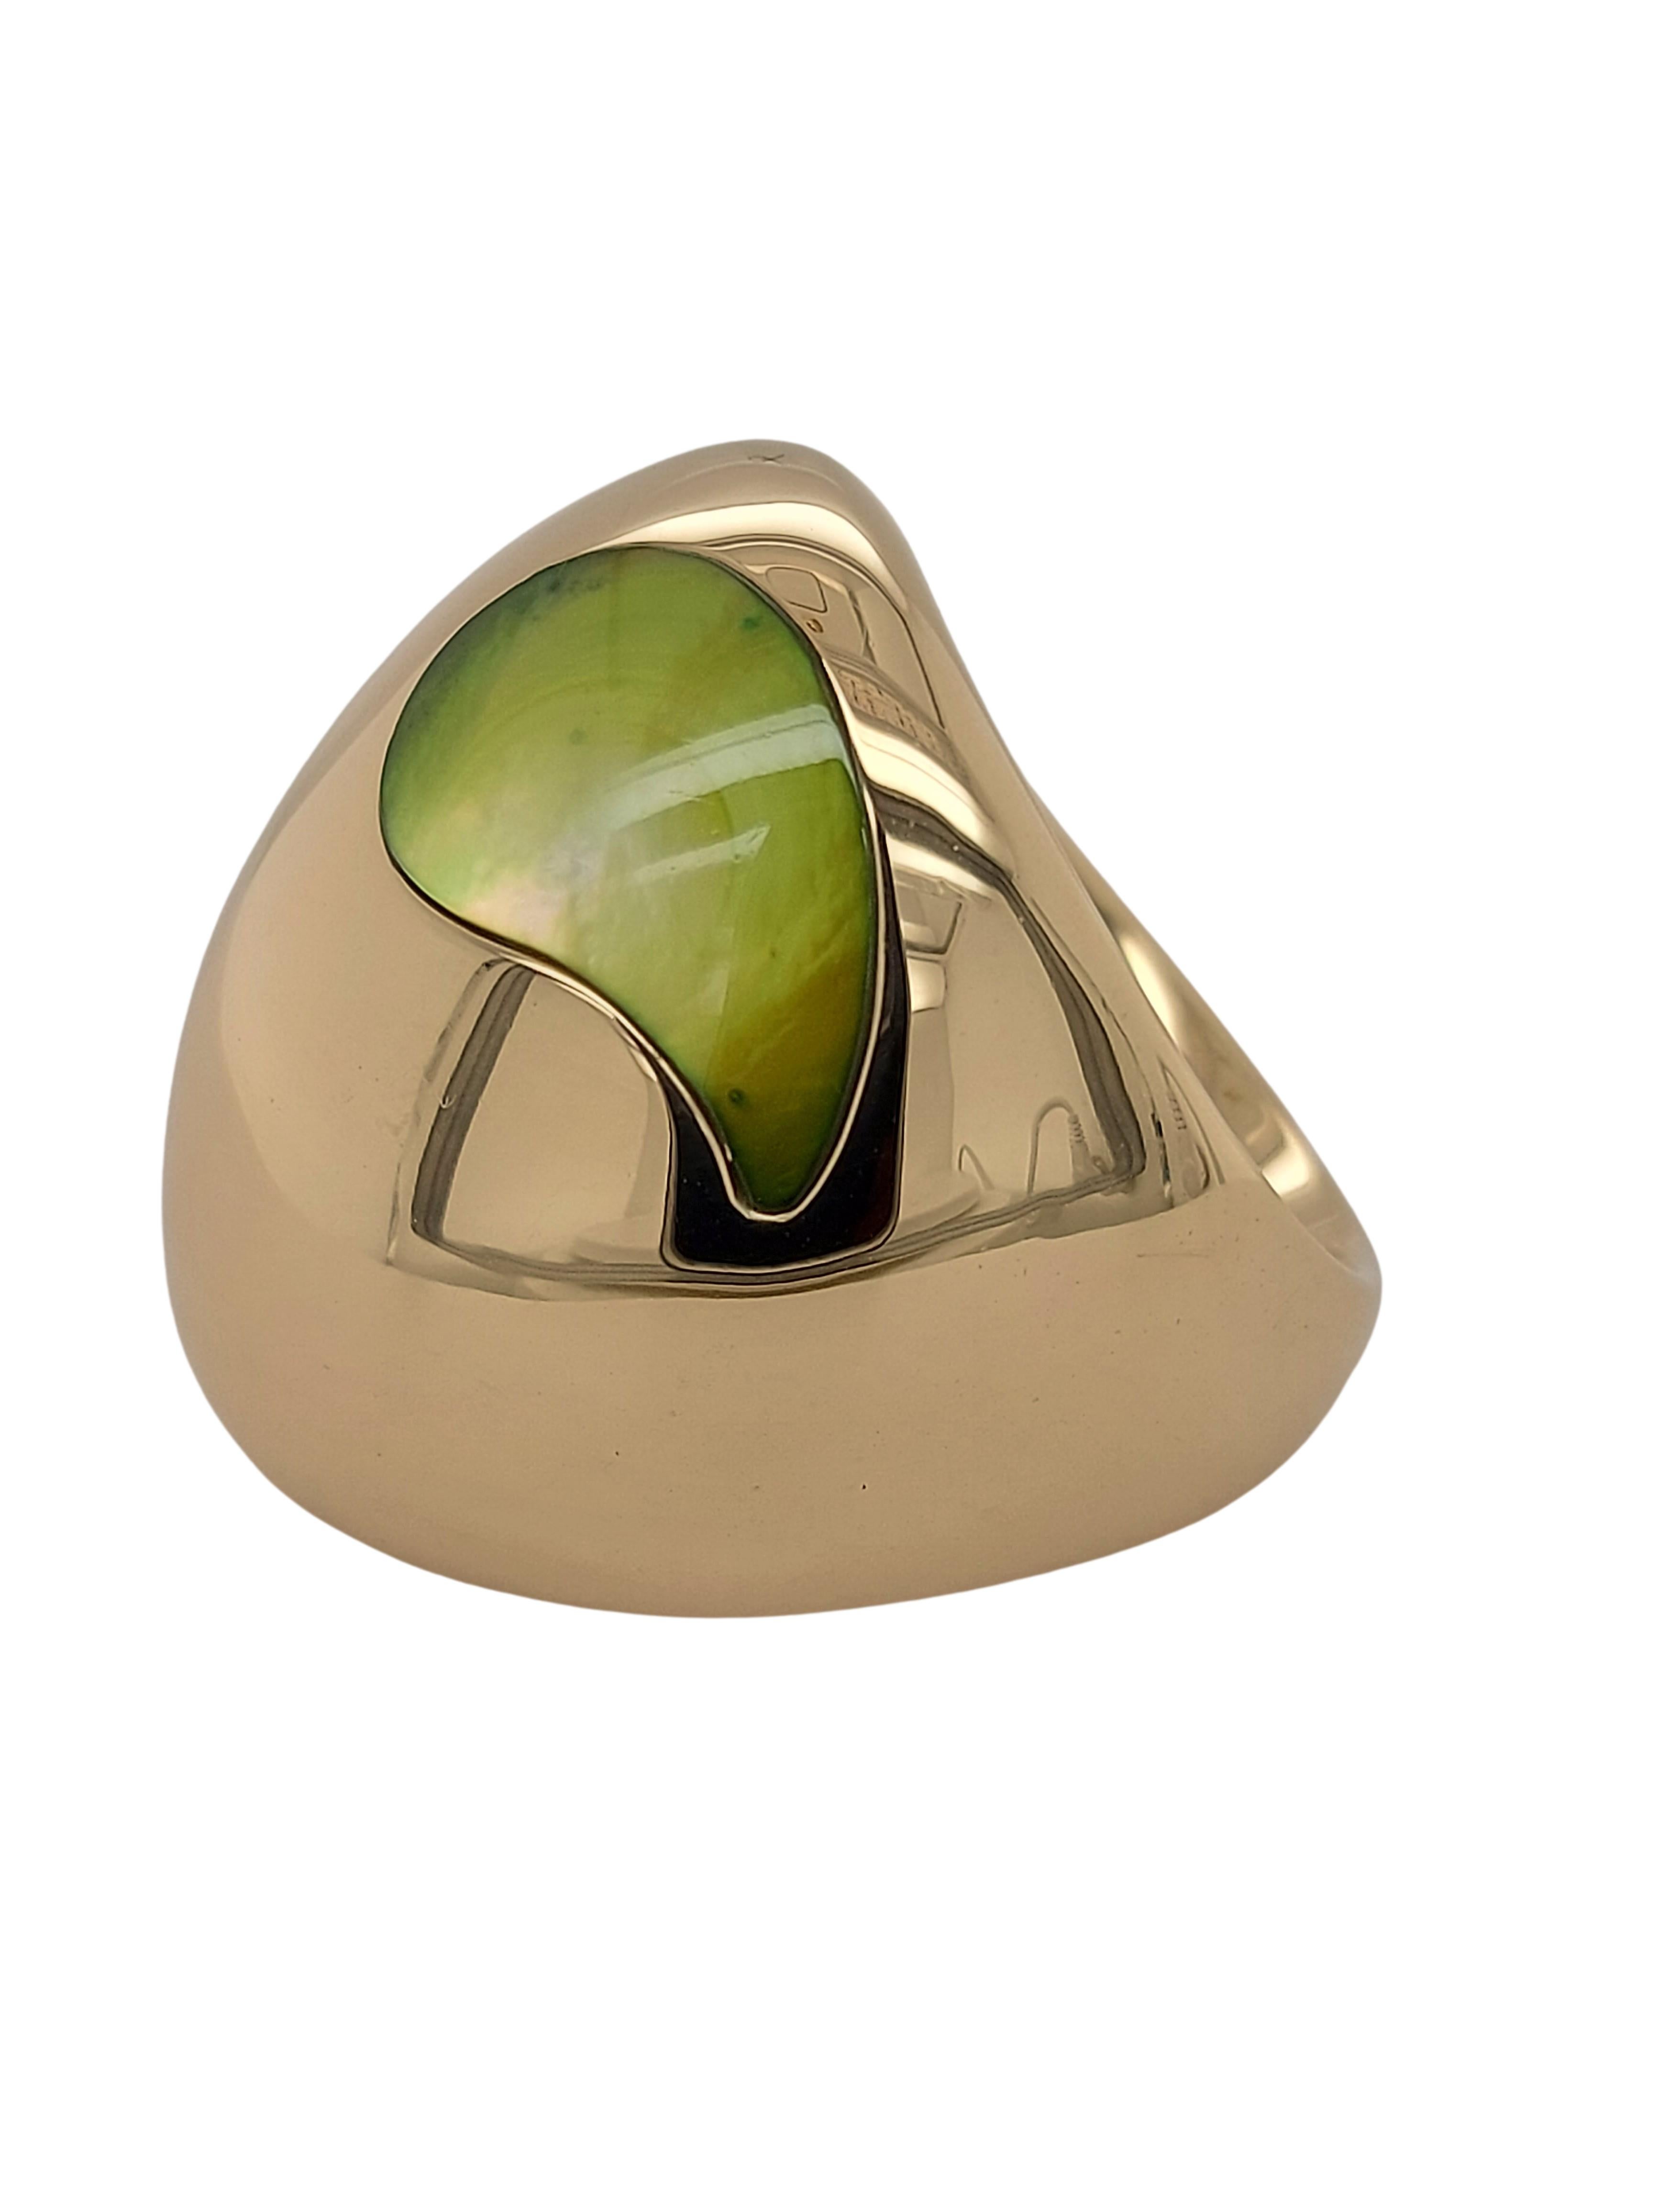 18kt Yellow Gold Mattioli Ring with mother of pearl

Material: 18kt yellow gold

Ring size: 54 EU / 7 US ( can be adjusted for free)

Total weight: 28.2 gram / 0.995 oz / 18.1 dwt